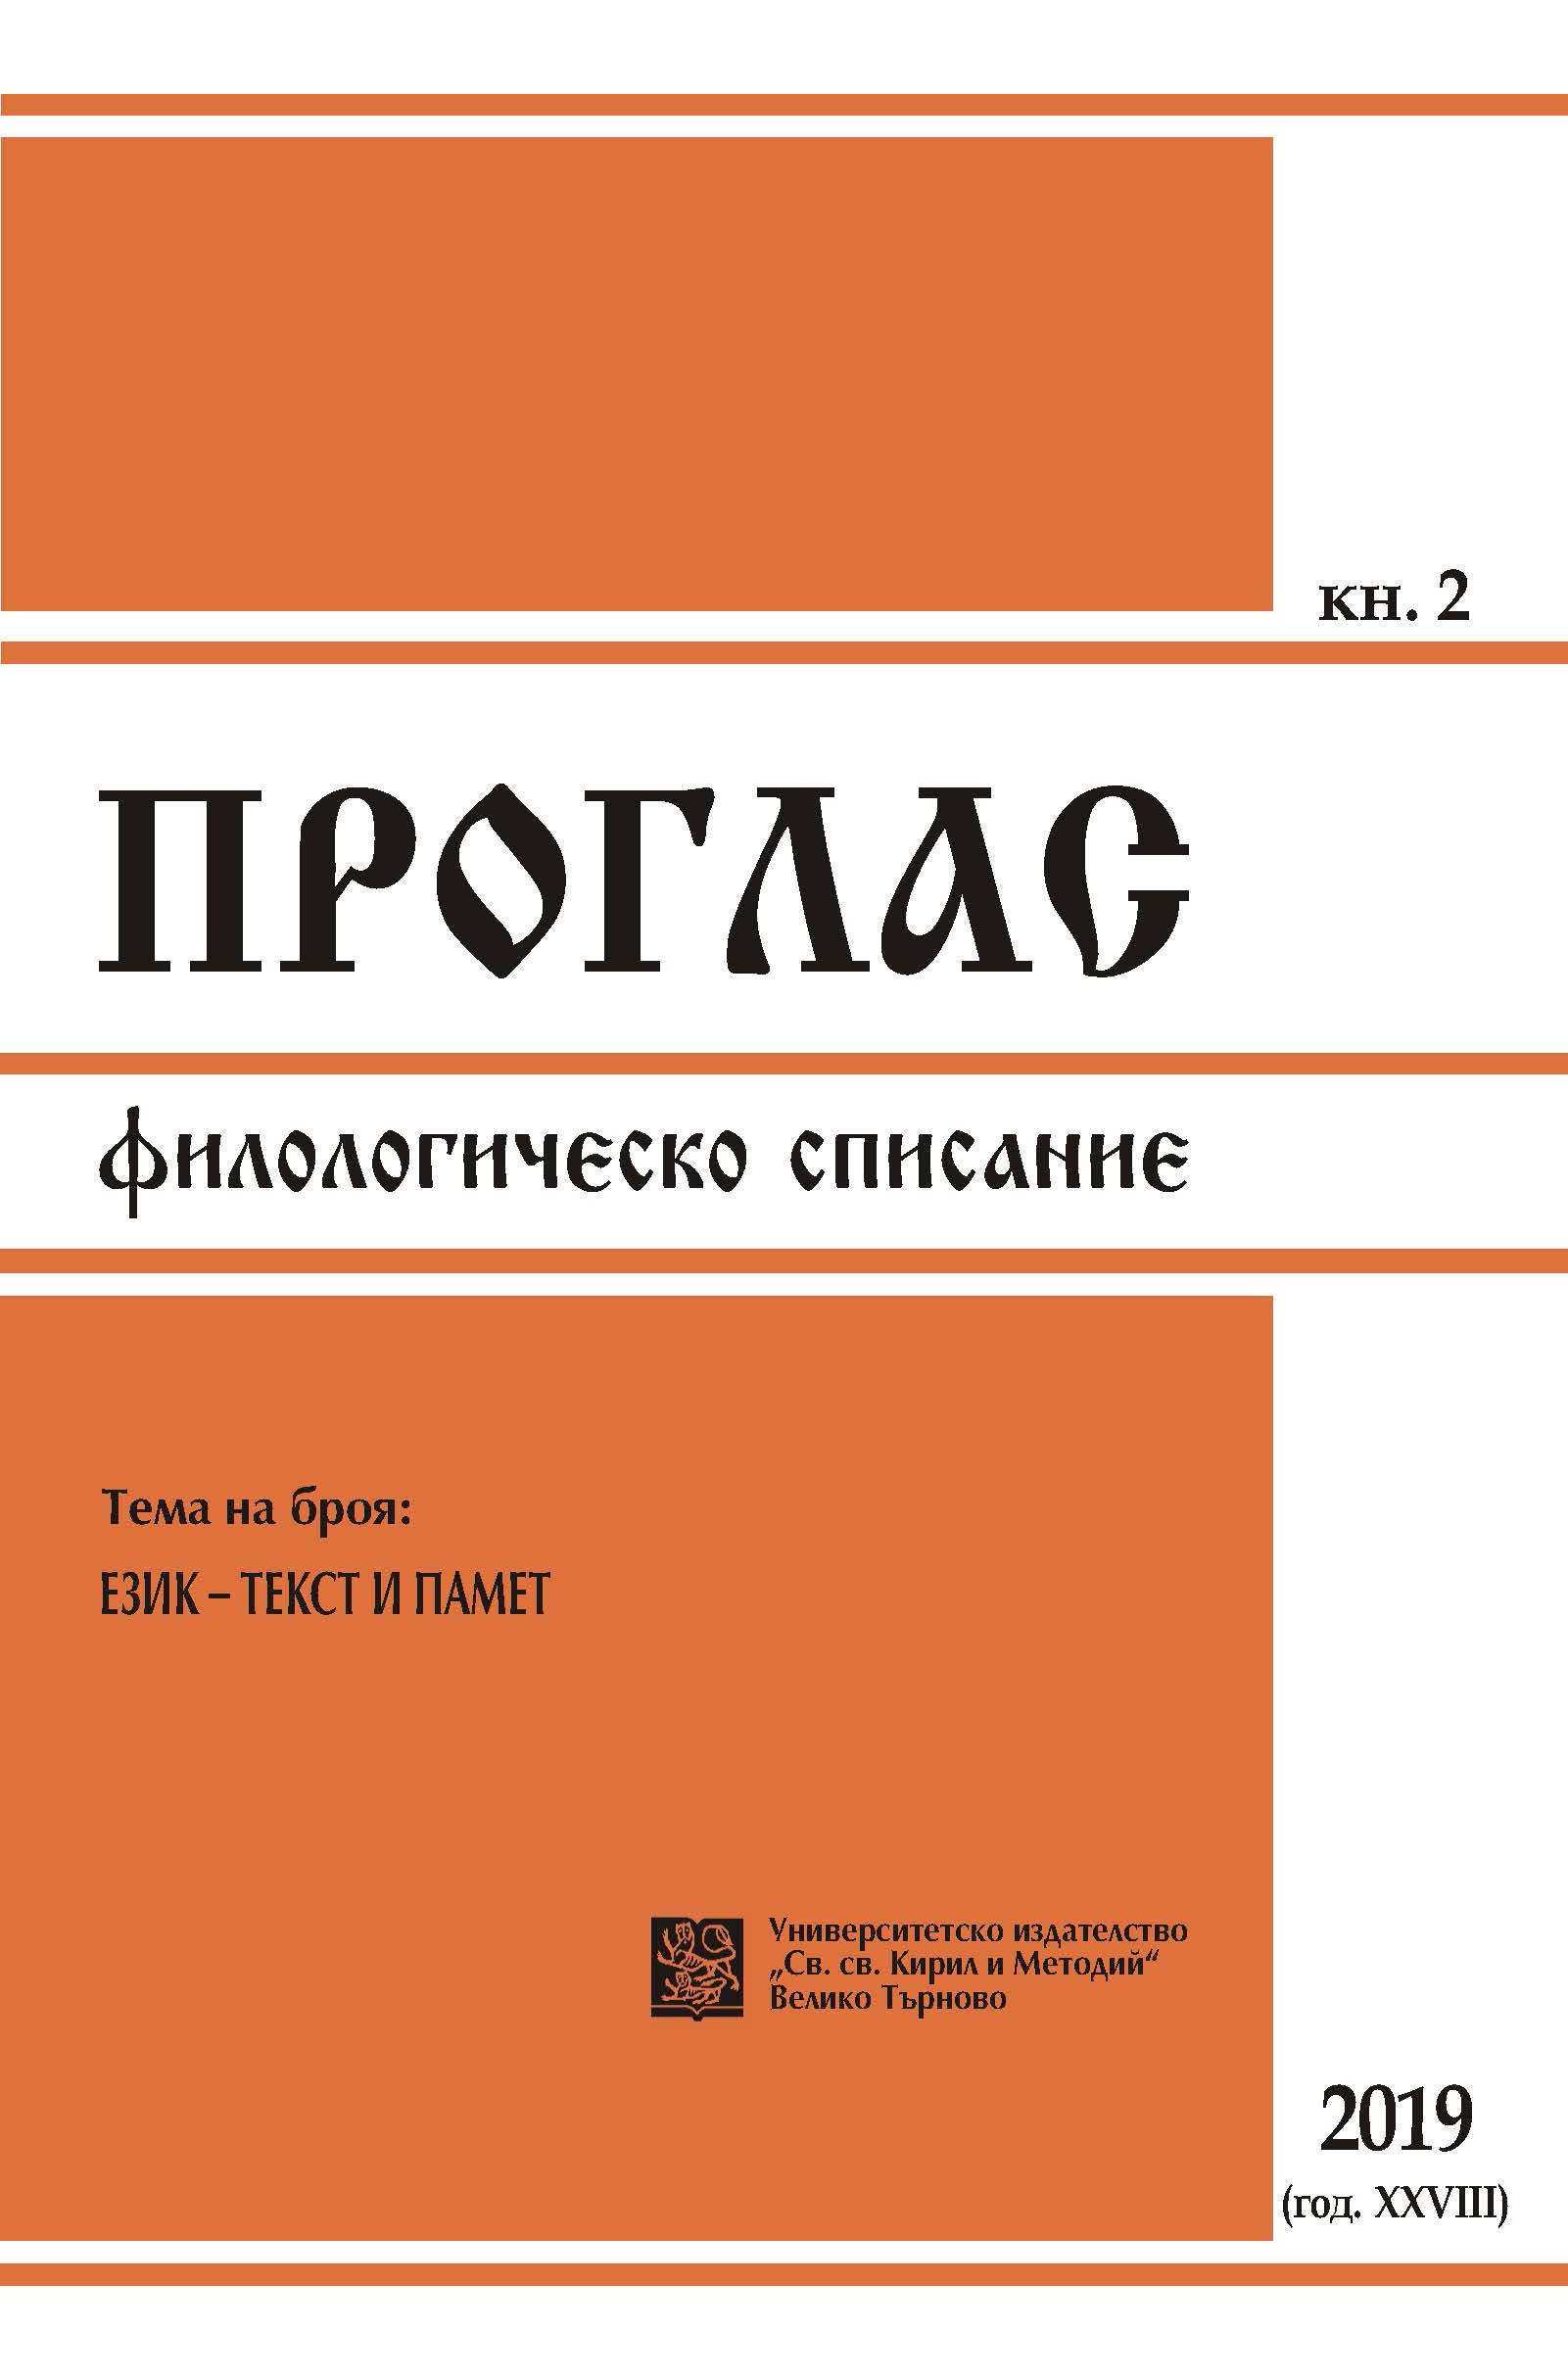 The greek books in Emanuil Vaskidovich’s library Cover Image